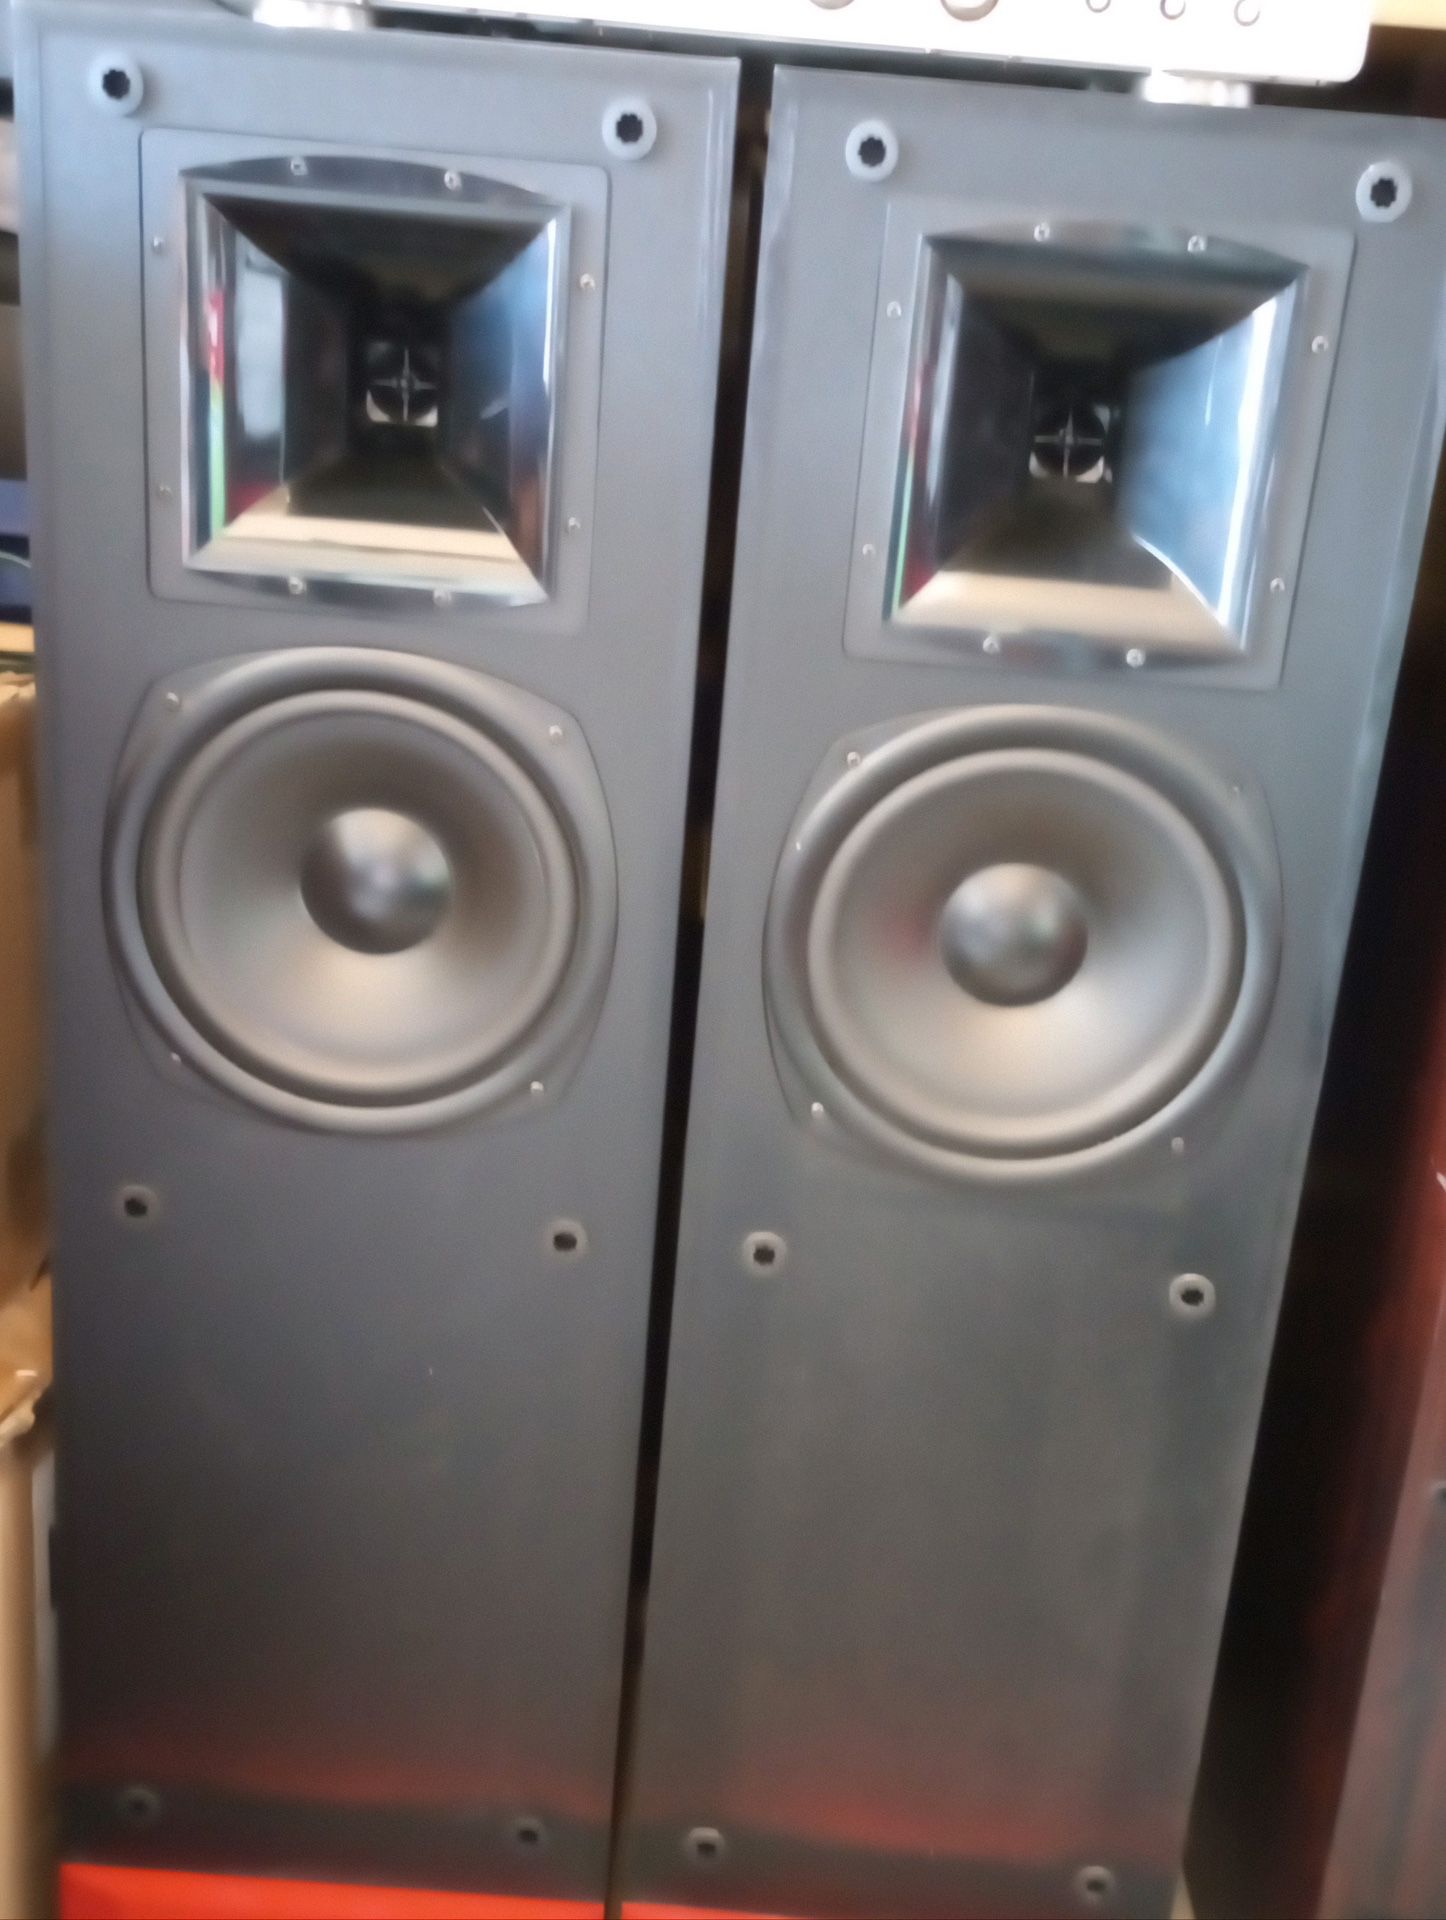 Stereo System W/speakers